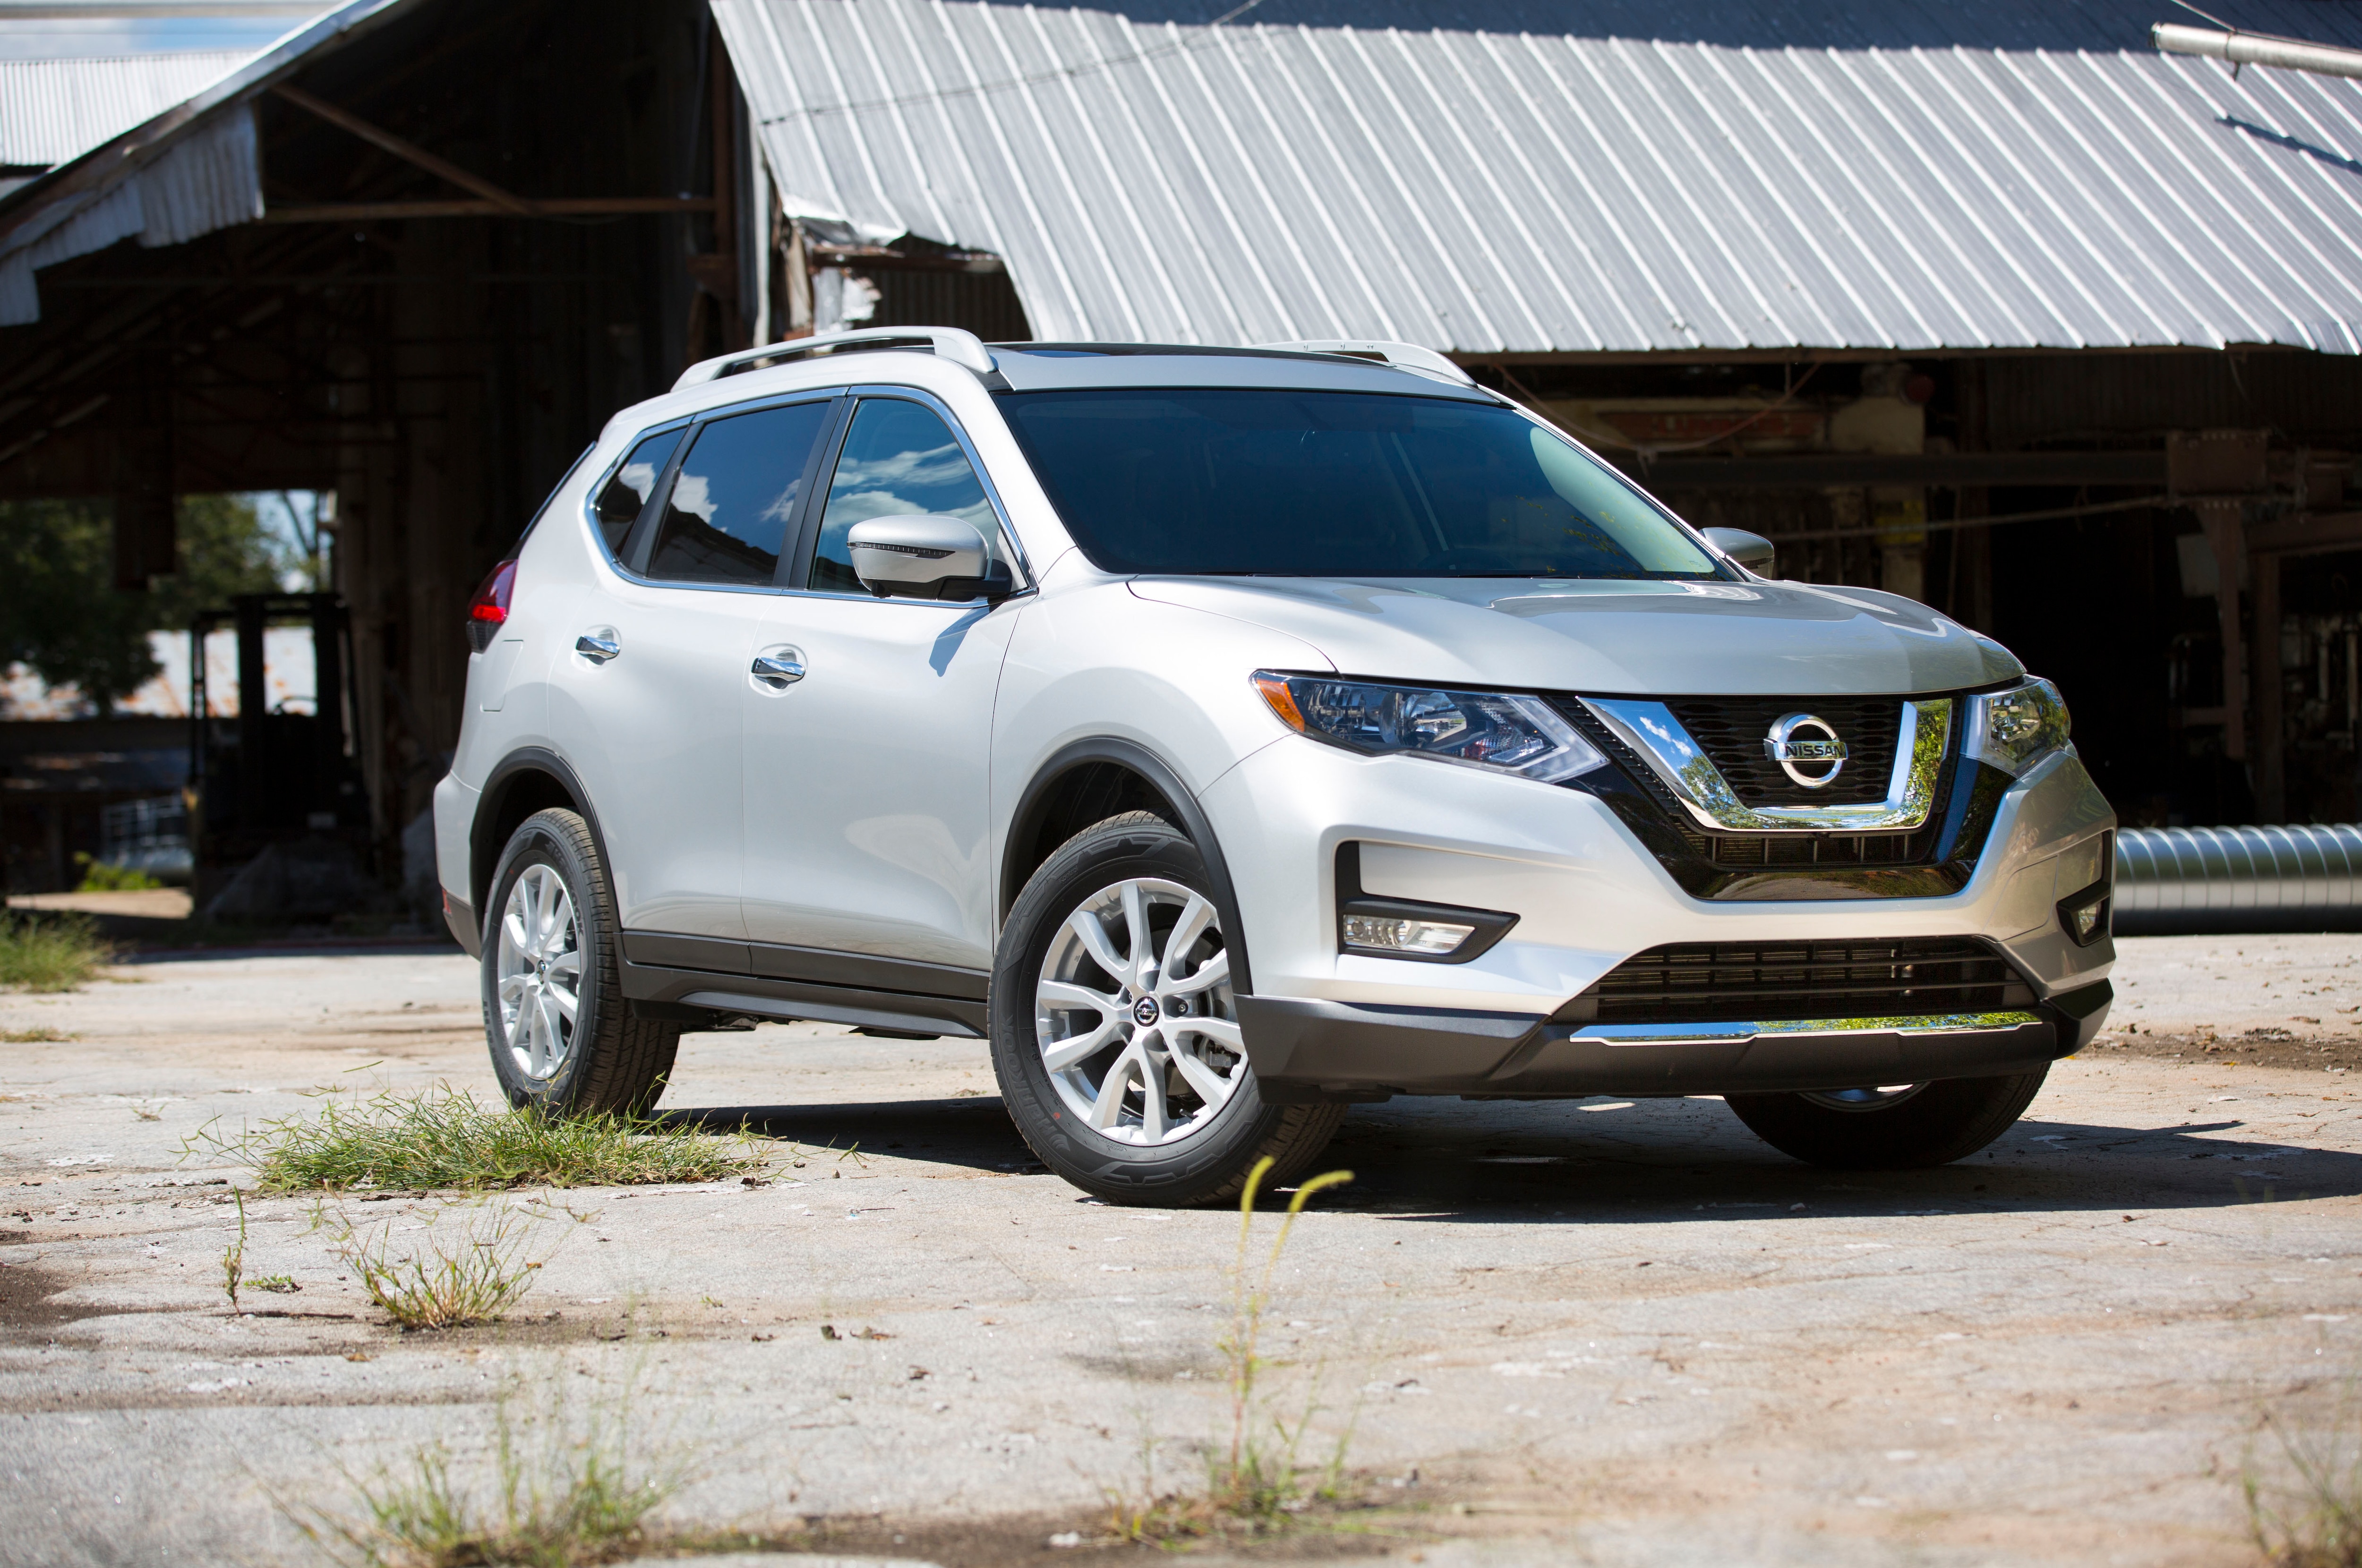 Nissan Rogue exterior specifications